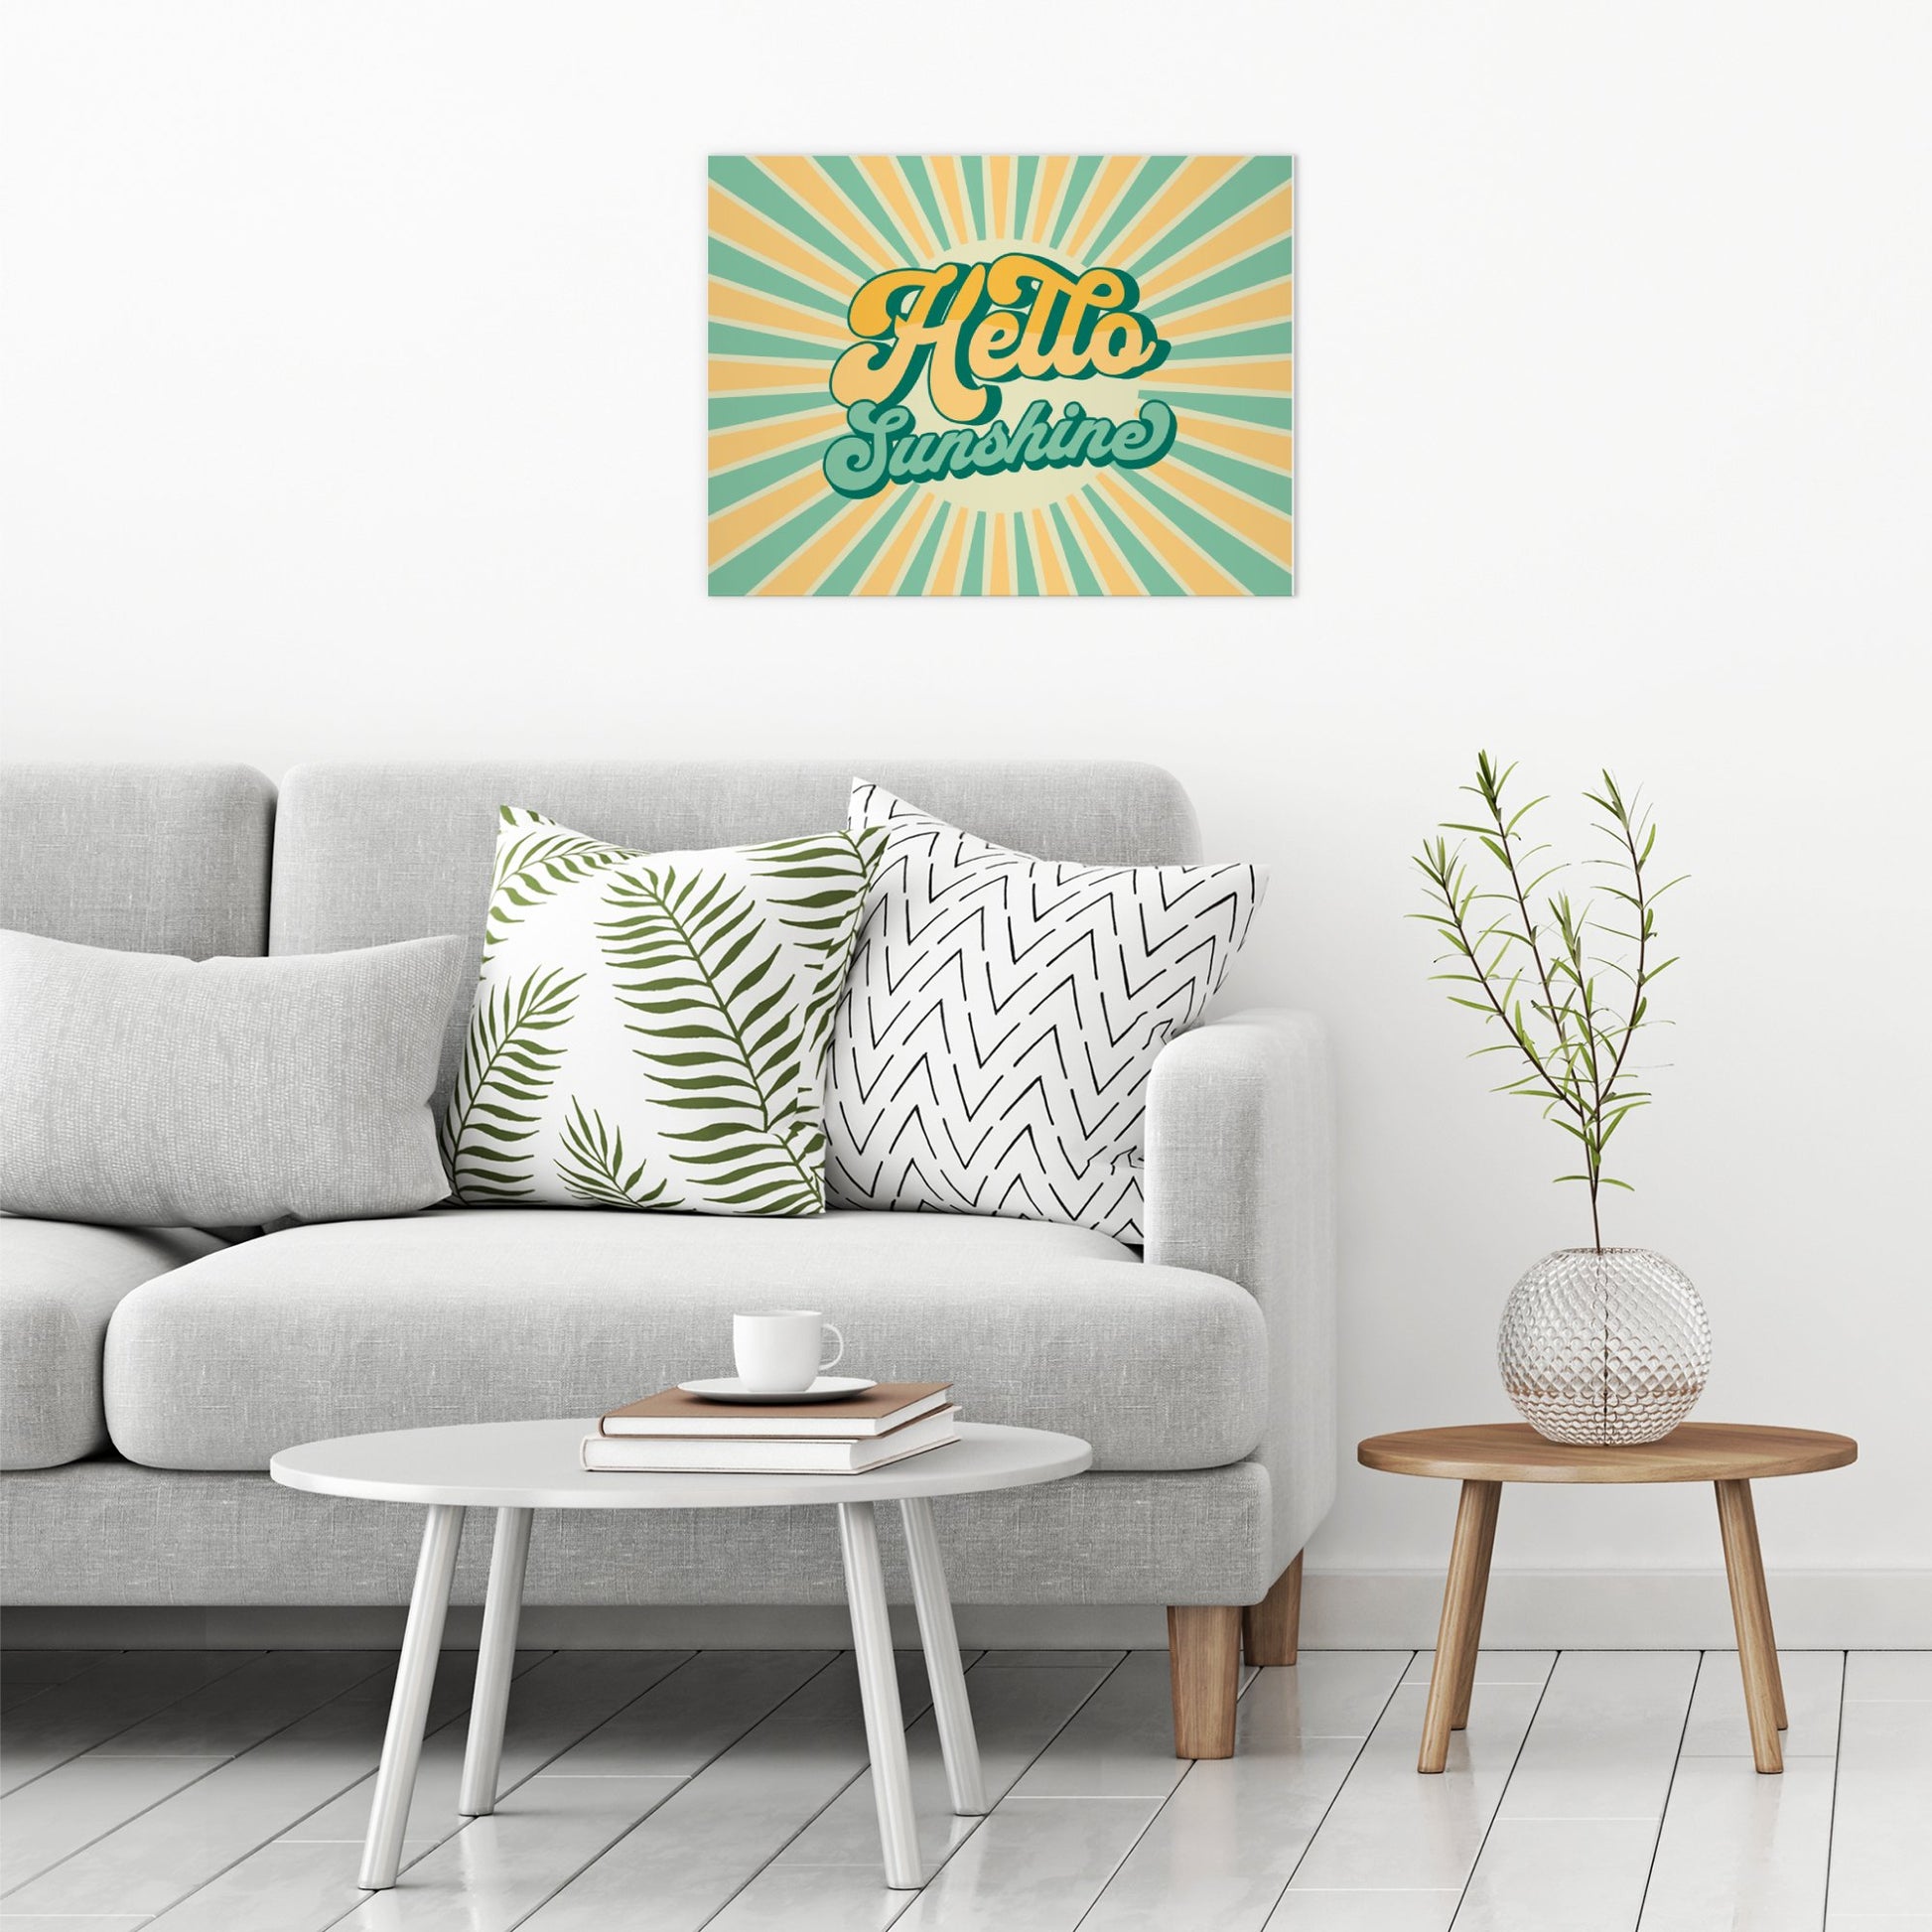 A contemporary modern room view showing a large size metal art poster display plate with printed design of a Hello Sunshine Quote